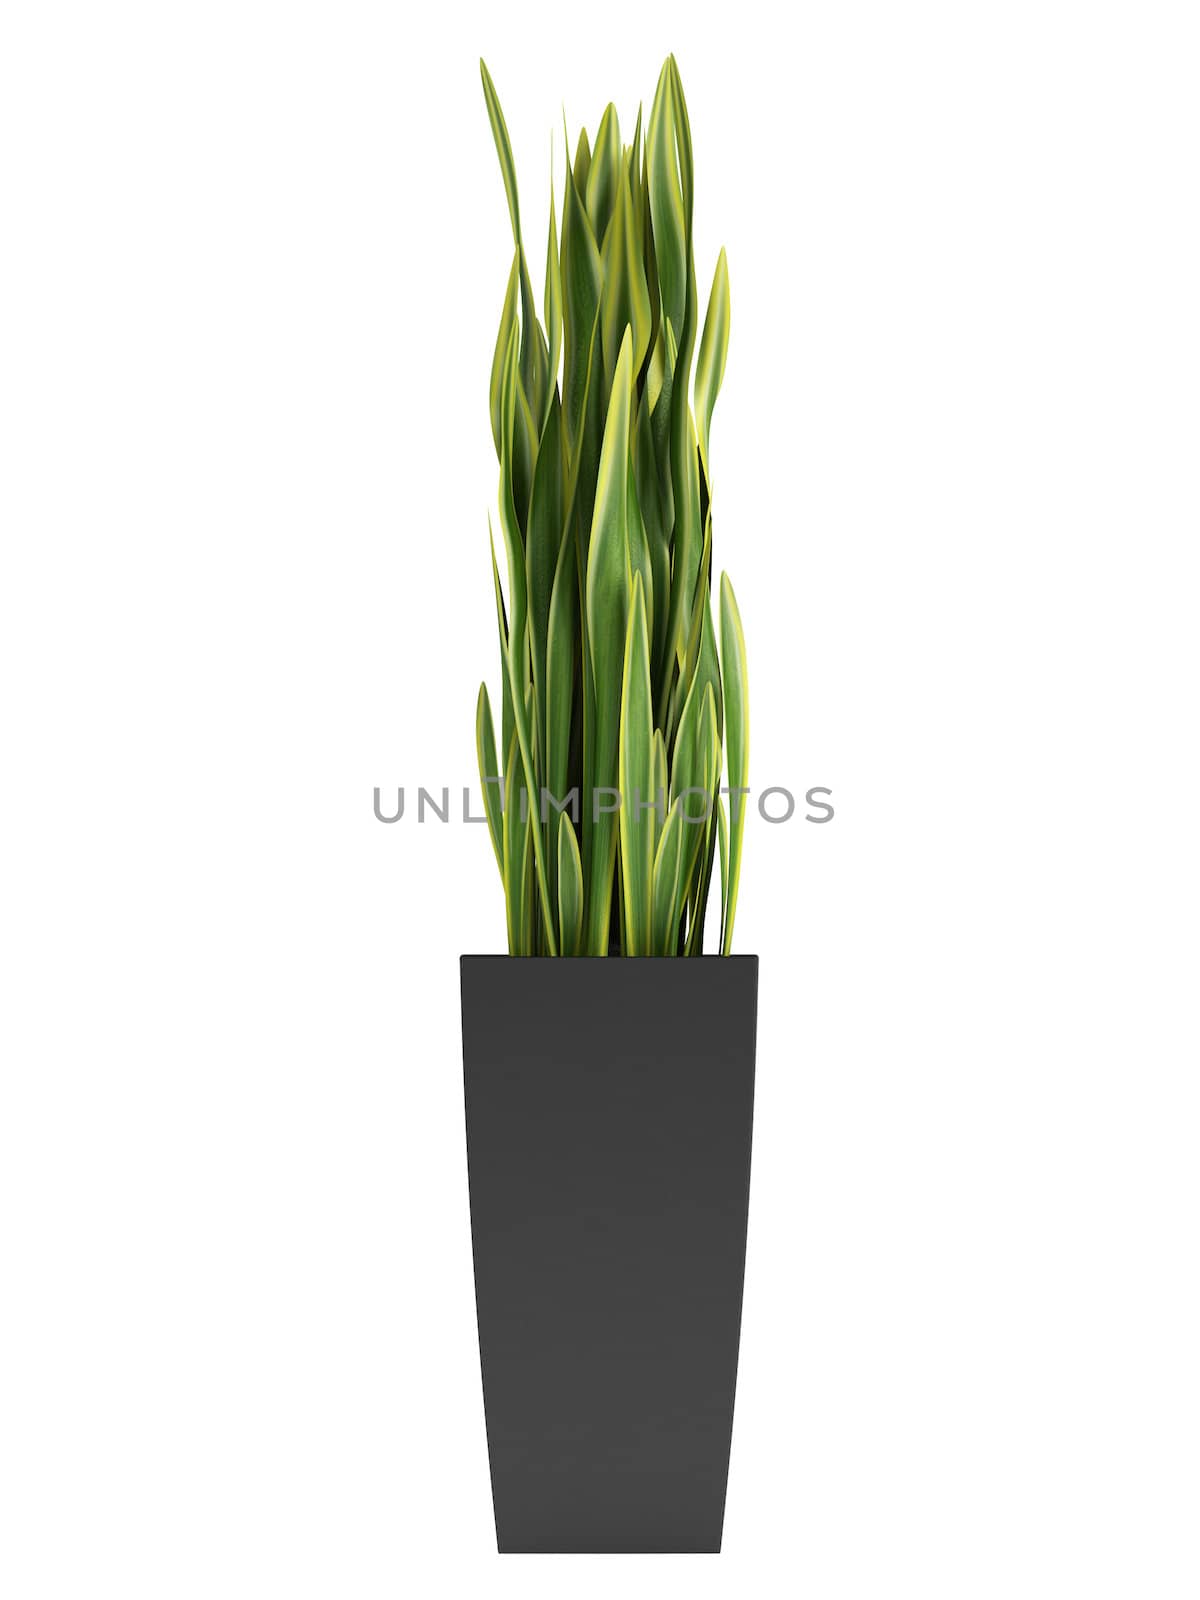 Sansevieria trifasciata, known as the the snake plant, forms dense stands through its creeping rhizome being cultivated in a container as a houseplant isolated on white